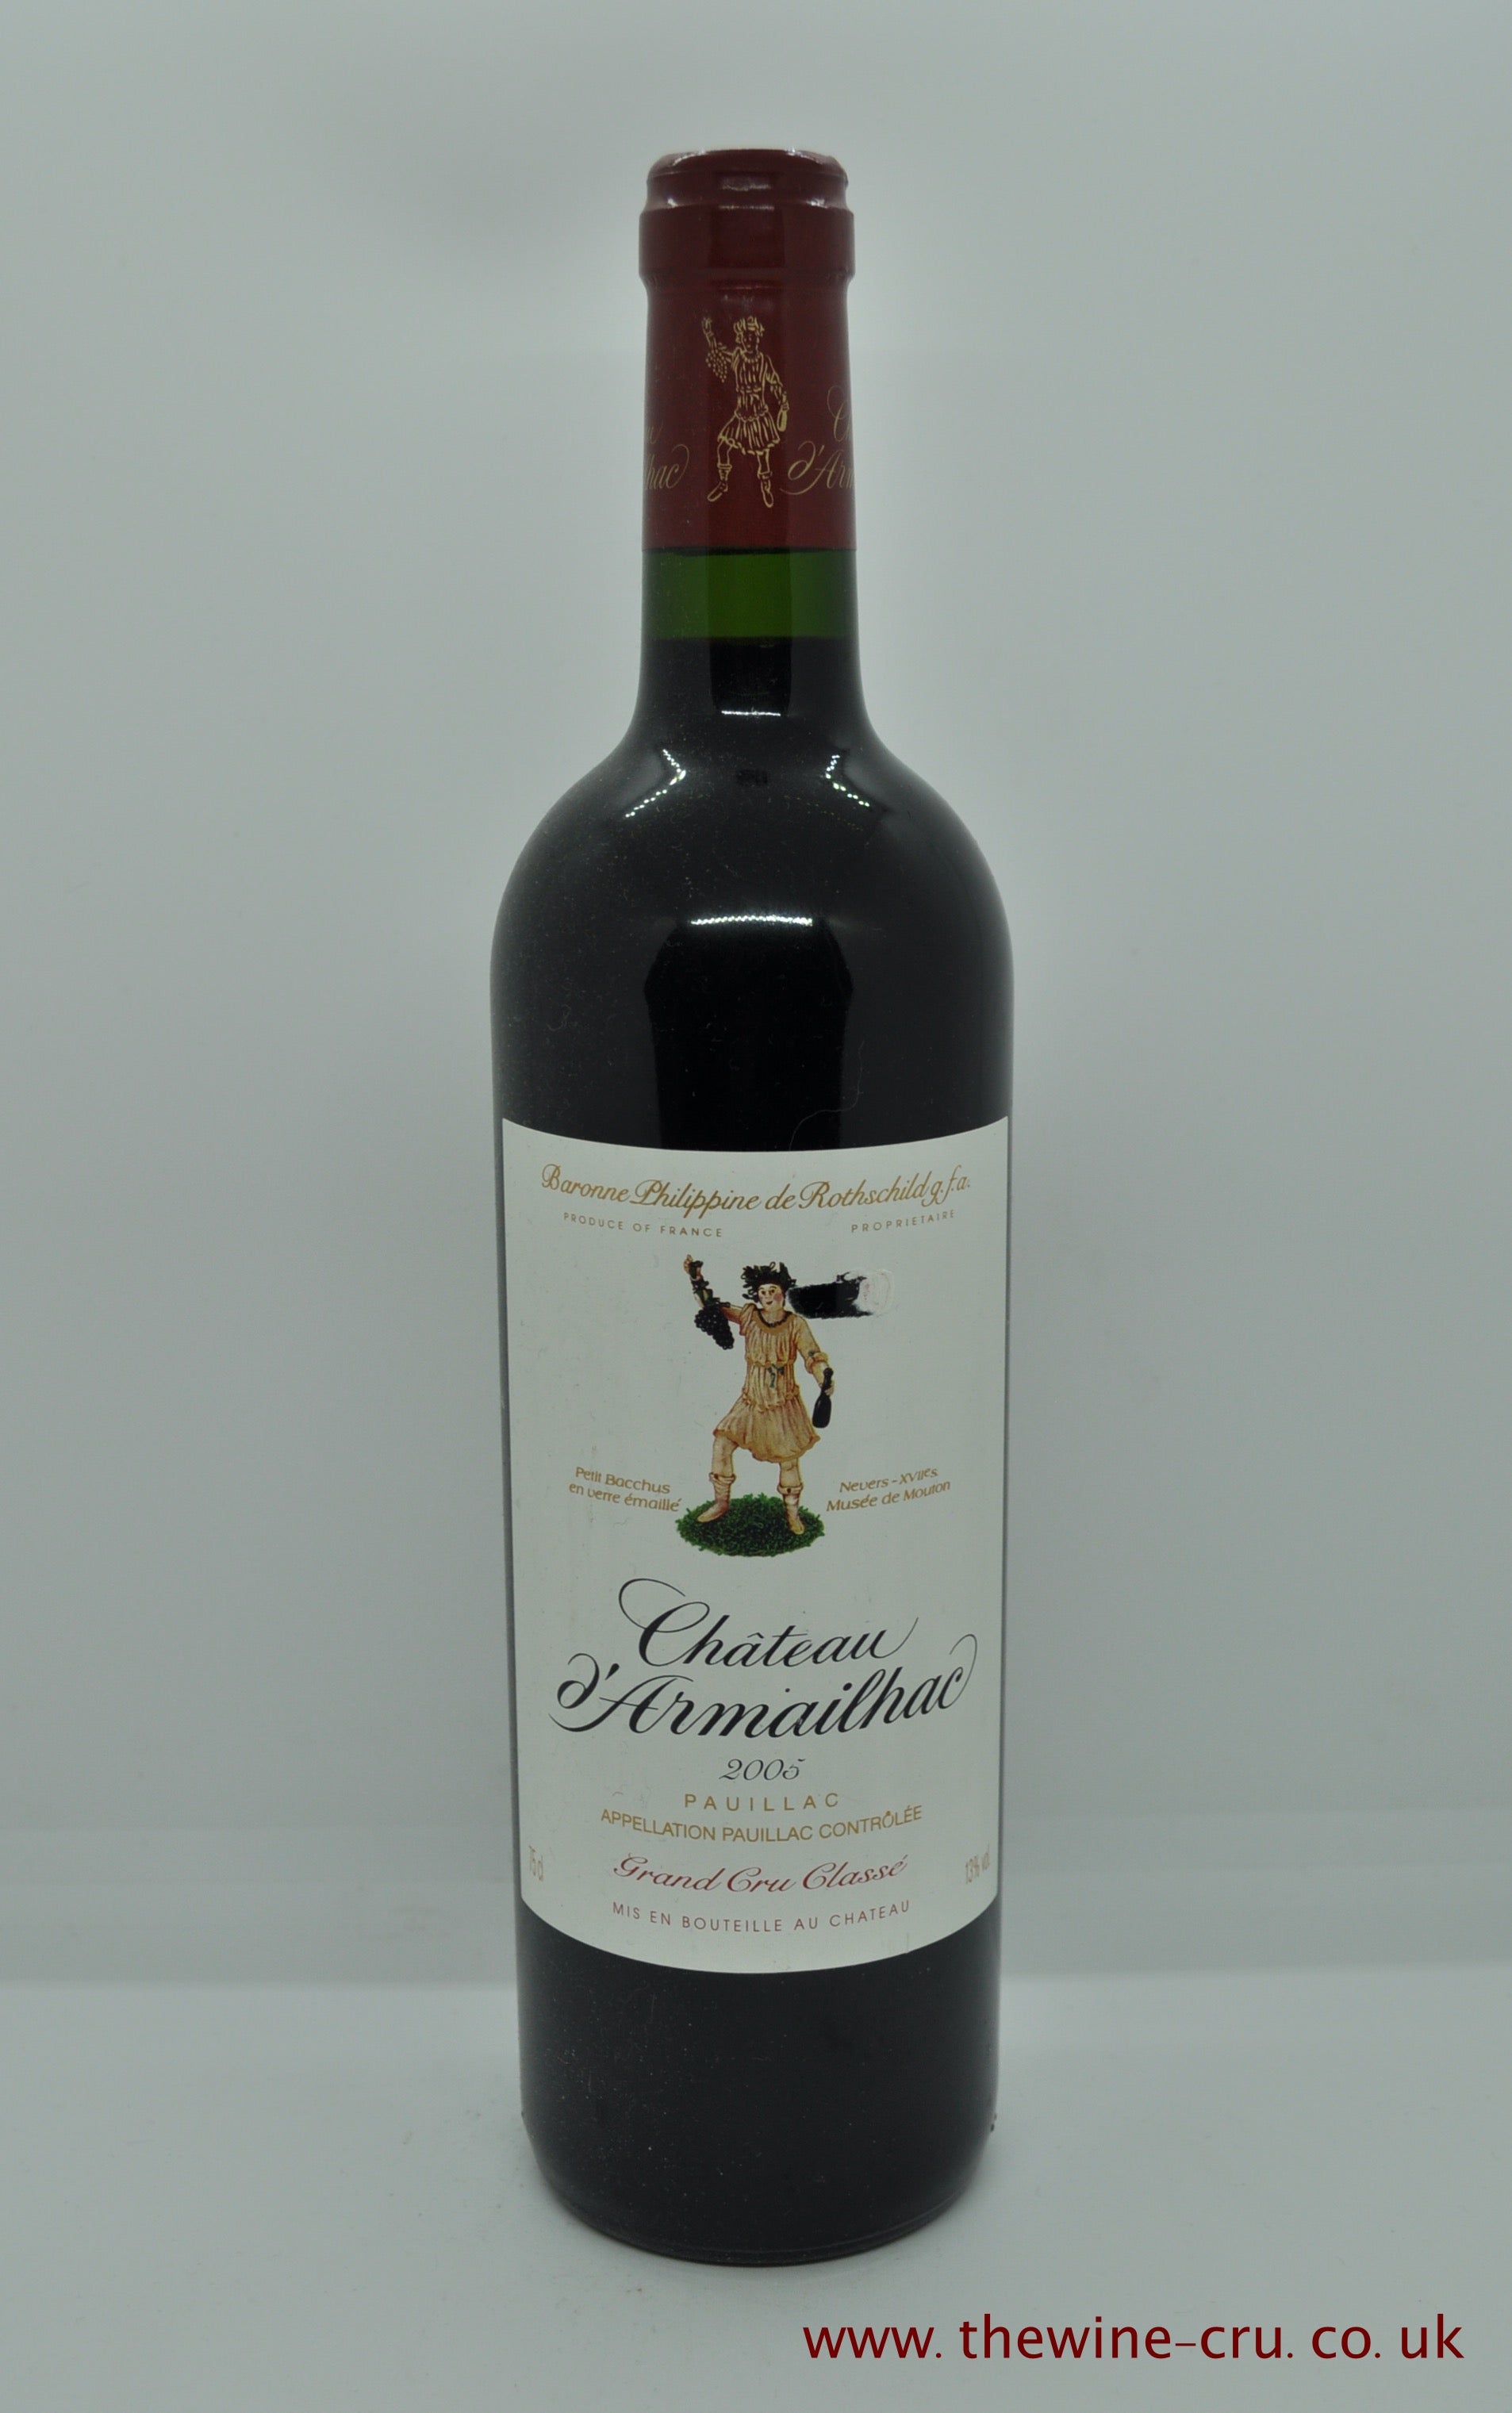 2005 vintage red wine. Chateau d"Armailhac 2005. France Bordeaux. Immediate delivery. Free local delivery. Gift wrapping available.